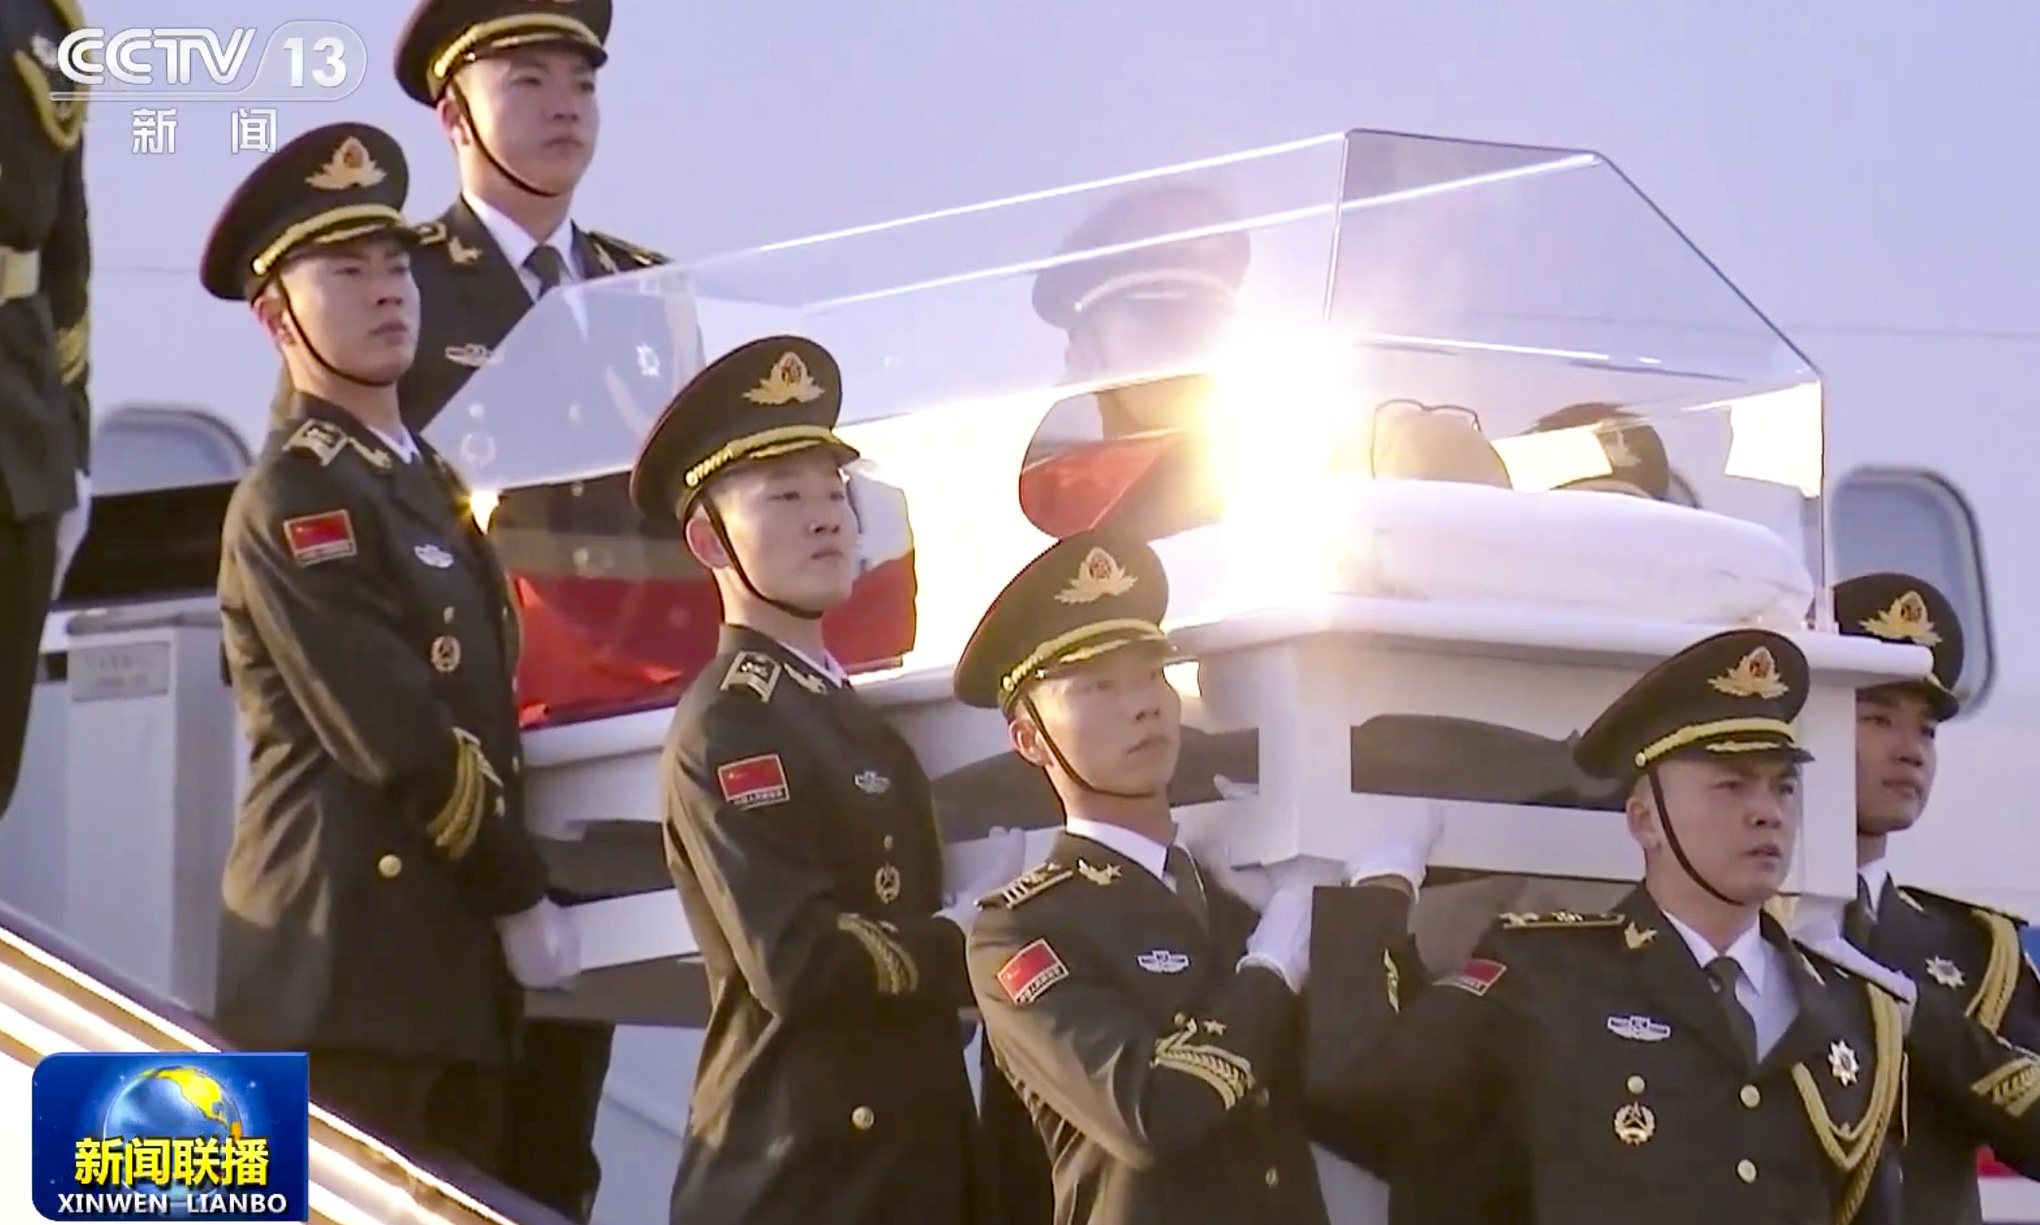 Troops carry Jiang Zemin’s casket down the steps from the plane that brought his body from Beijing. Photo: CCTV